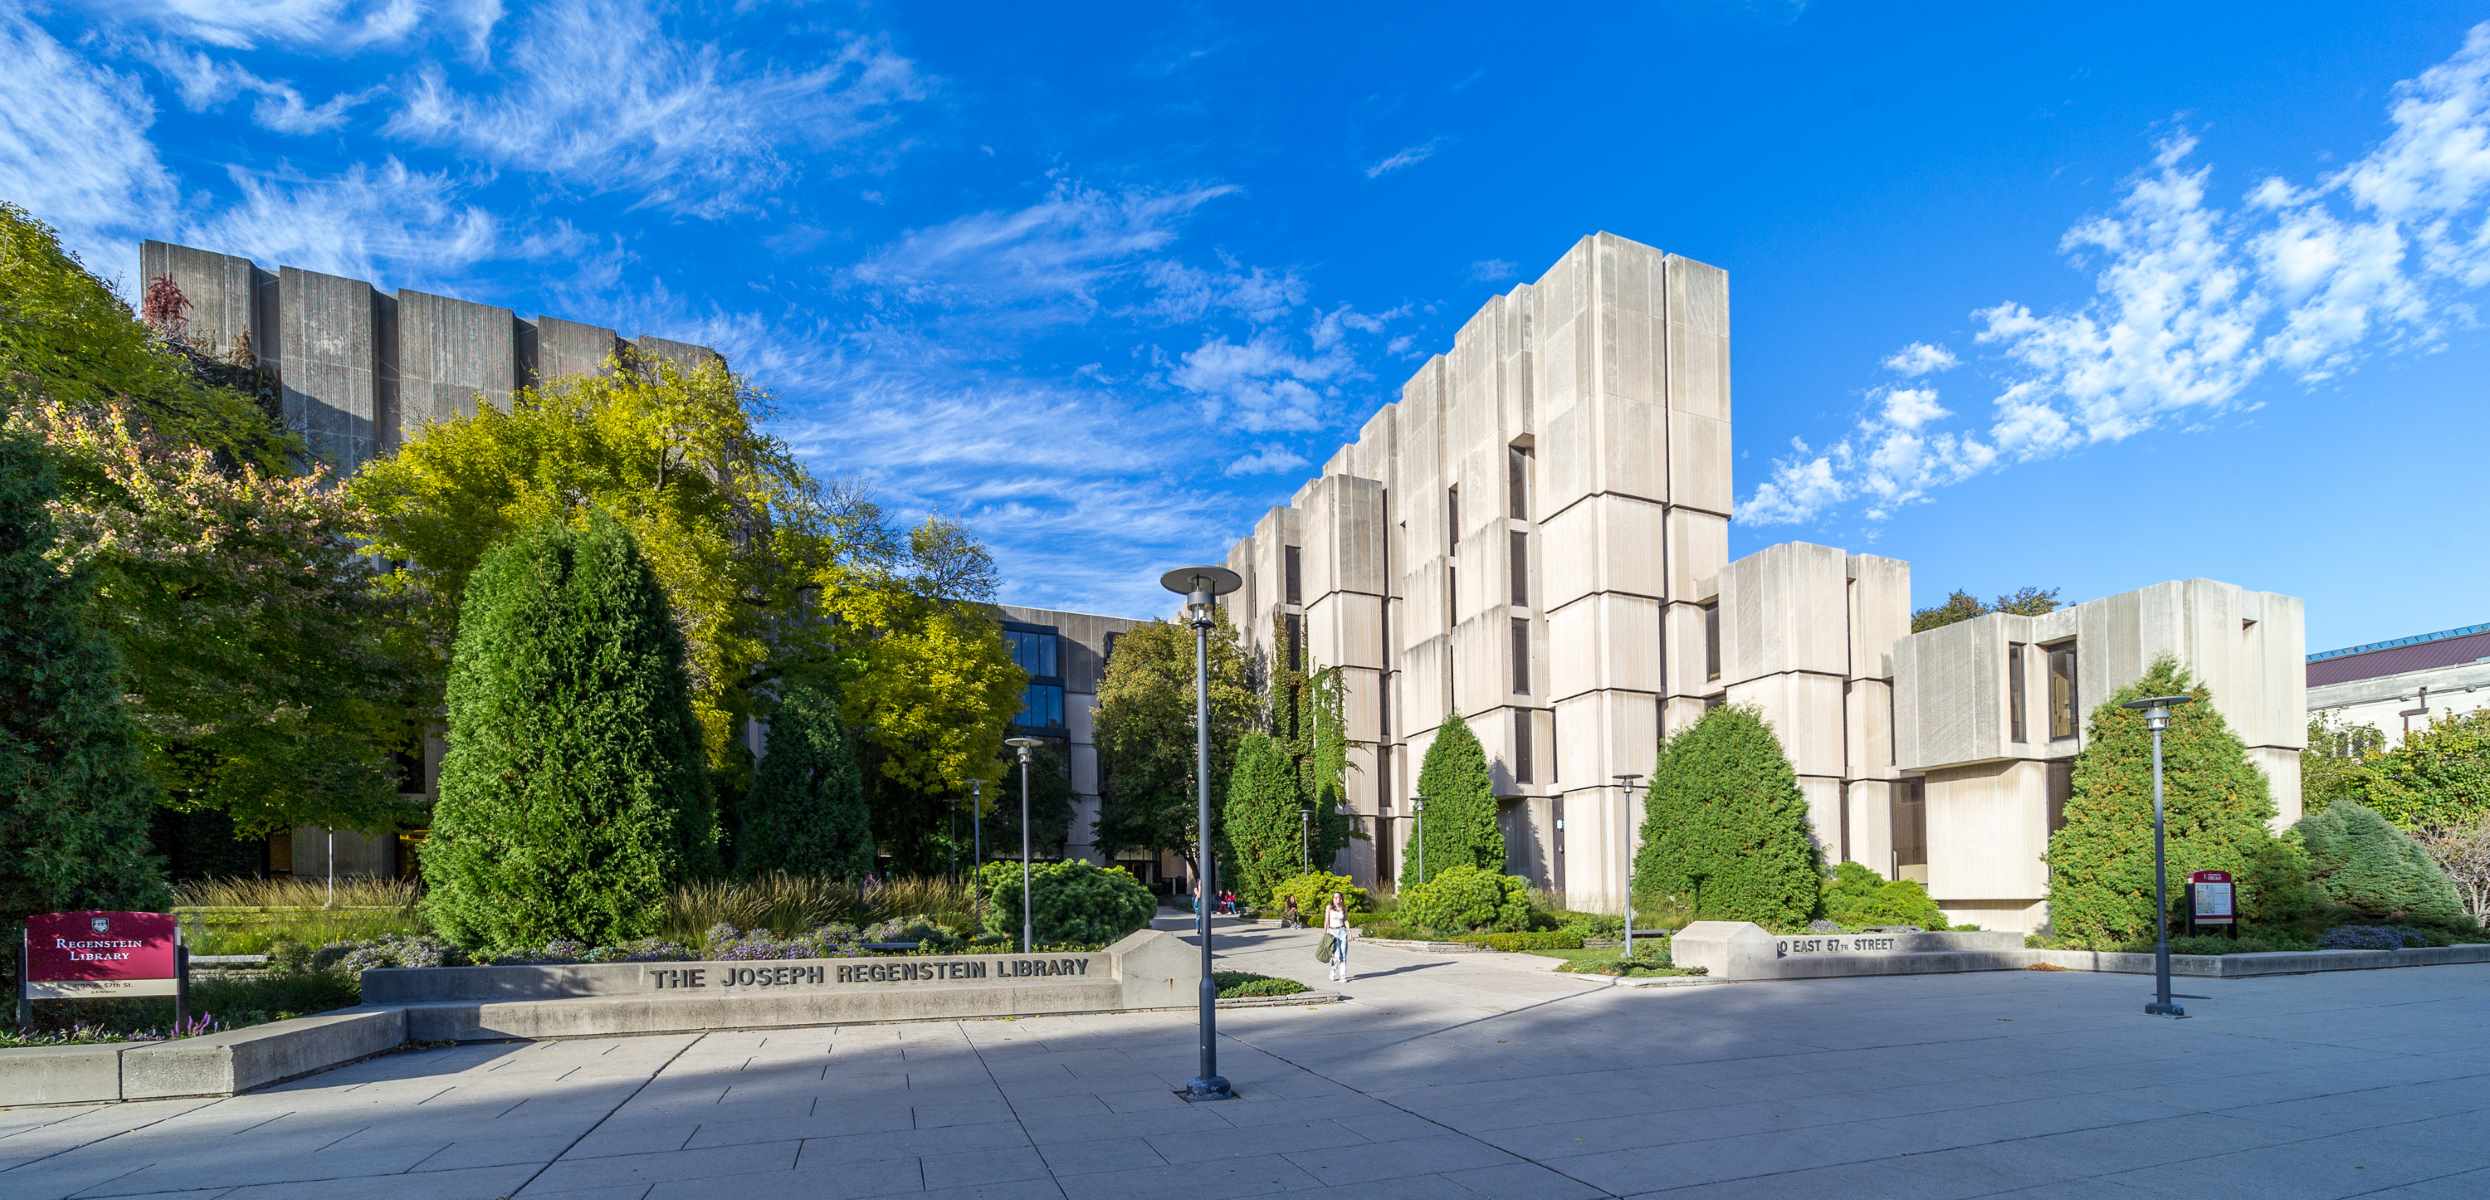 15-surprising-facts-about-regenstein-library